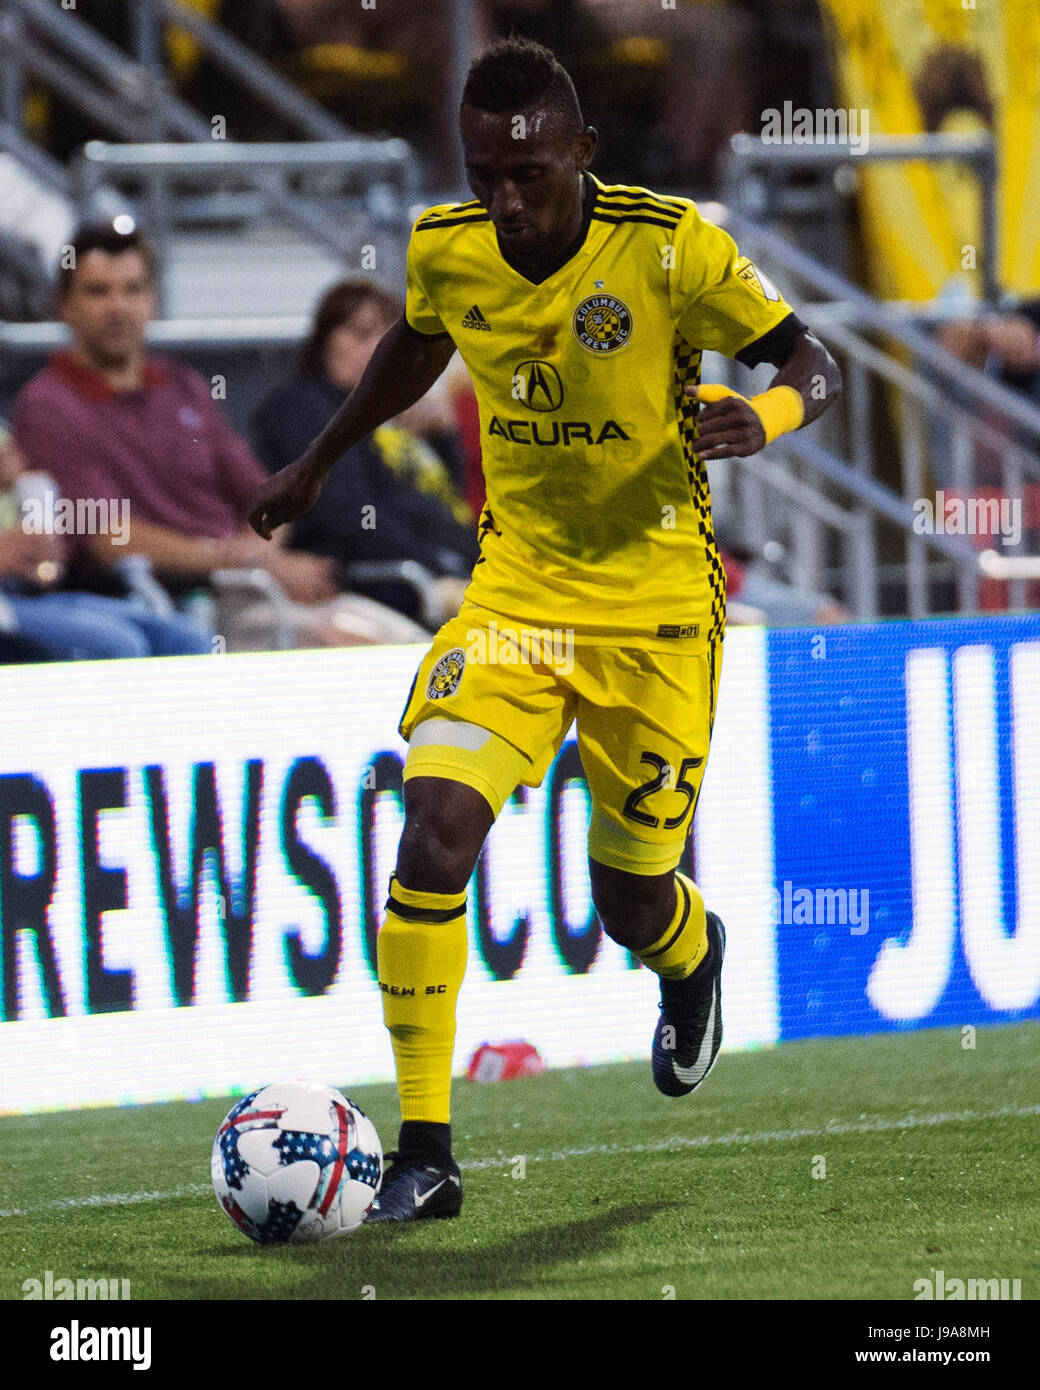 Columbus, U.S.A. 31st May, 2017. May 31, 2017: Columbus Crew SC defender Harrison Afful (25) the ball against Seattle in their game at Mapfre Stadium. Columbus, Ohio, USA. Credit: Brent Clark/Alamy Live News Stock Photo